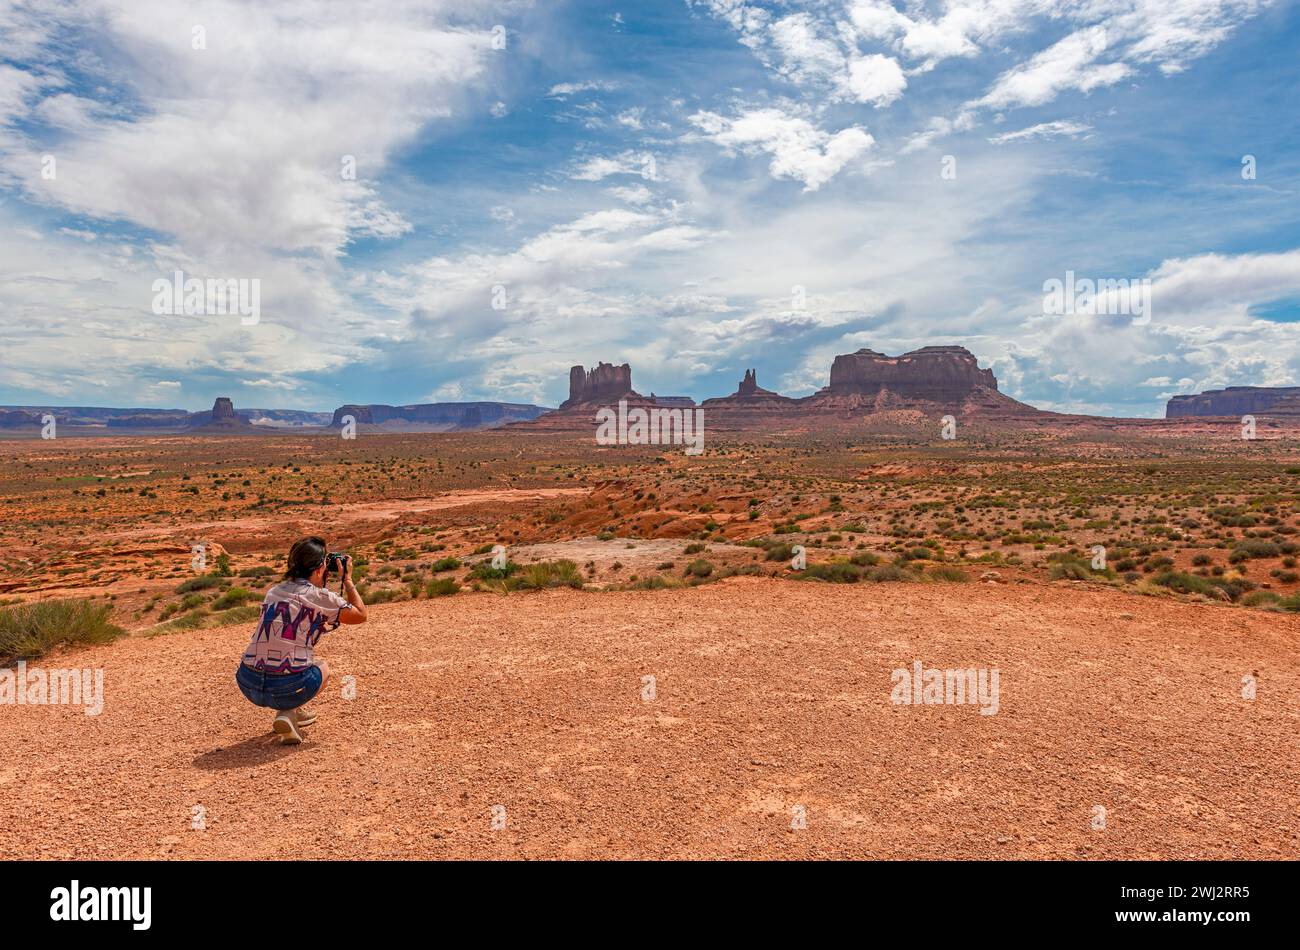 Woman tourist taking photographs of the buttes of the Monument Valley Navajo Tribal Park, Arizona and Utah, USA. Stock Photo